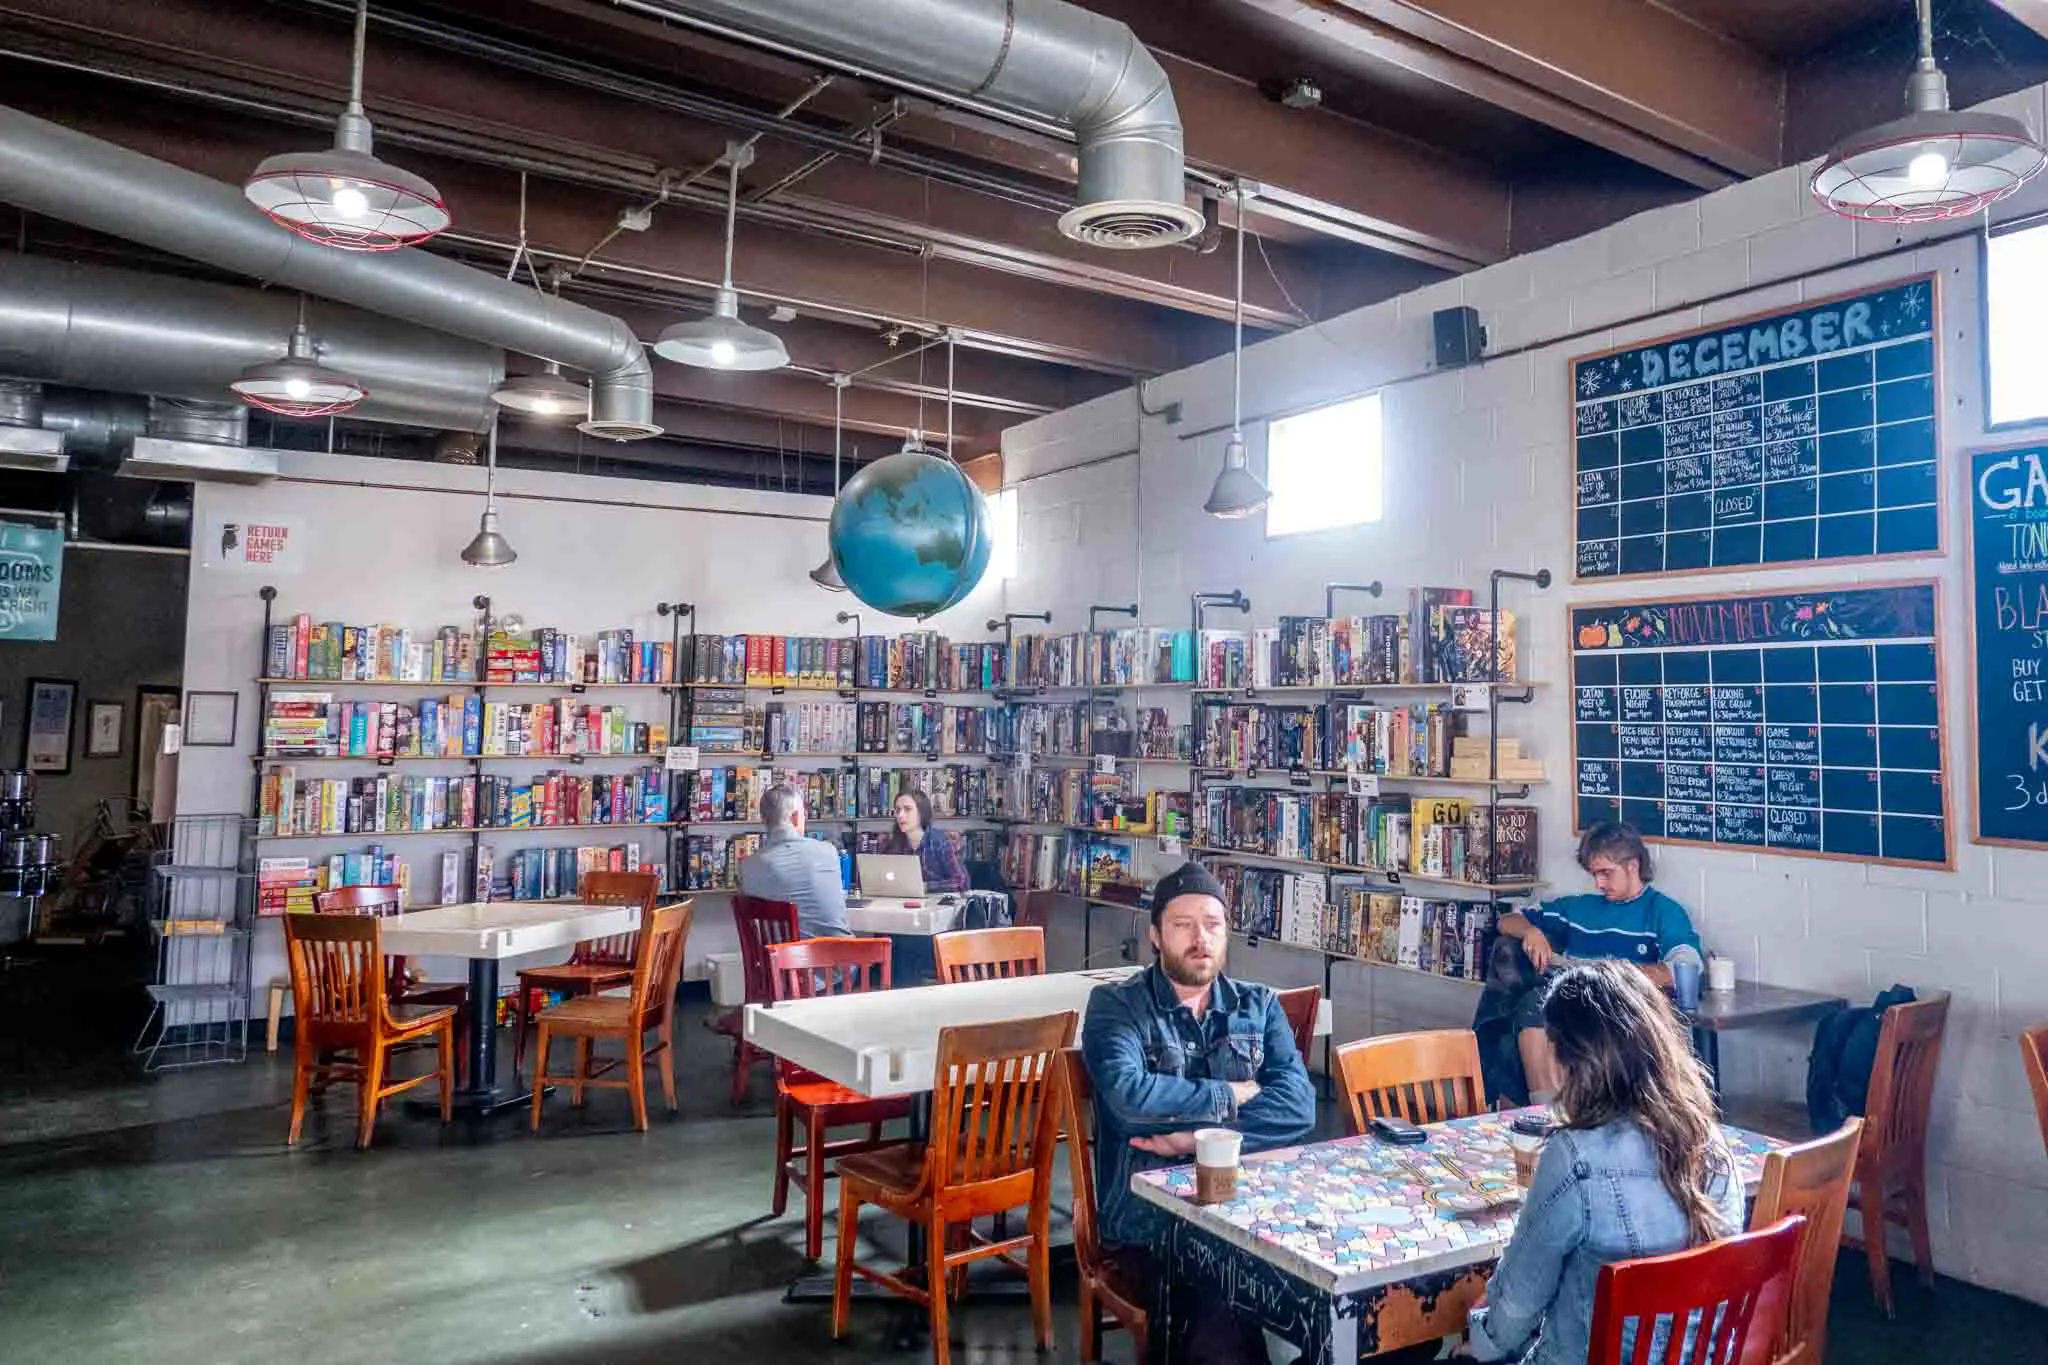 People sitting at cafe tables in front of a wall full of board games